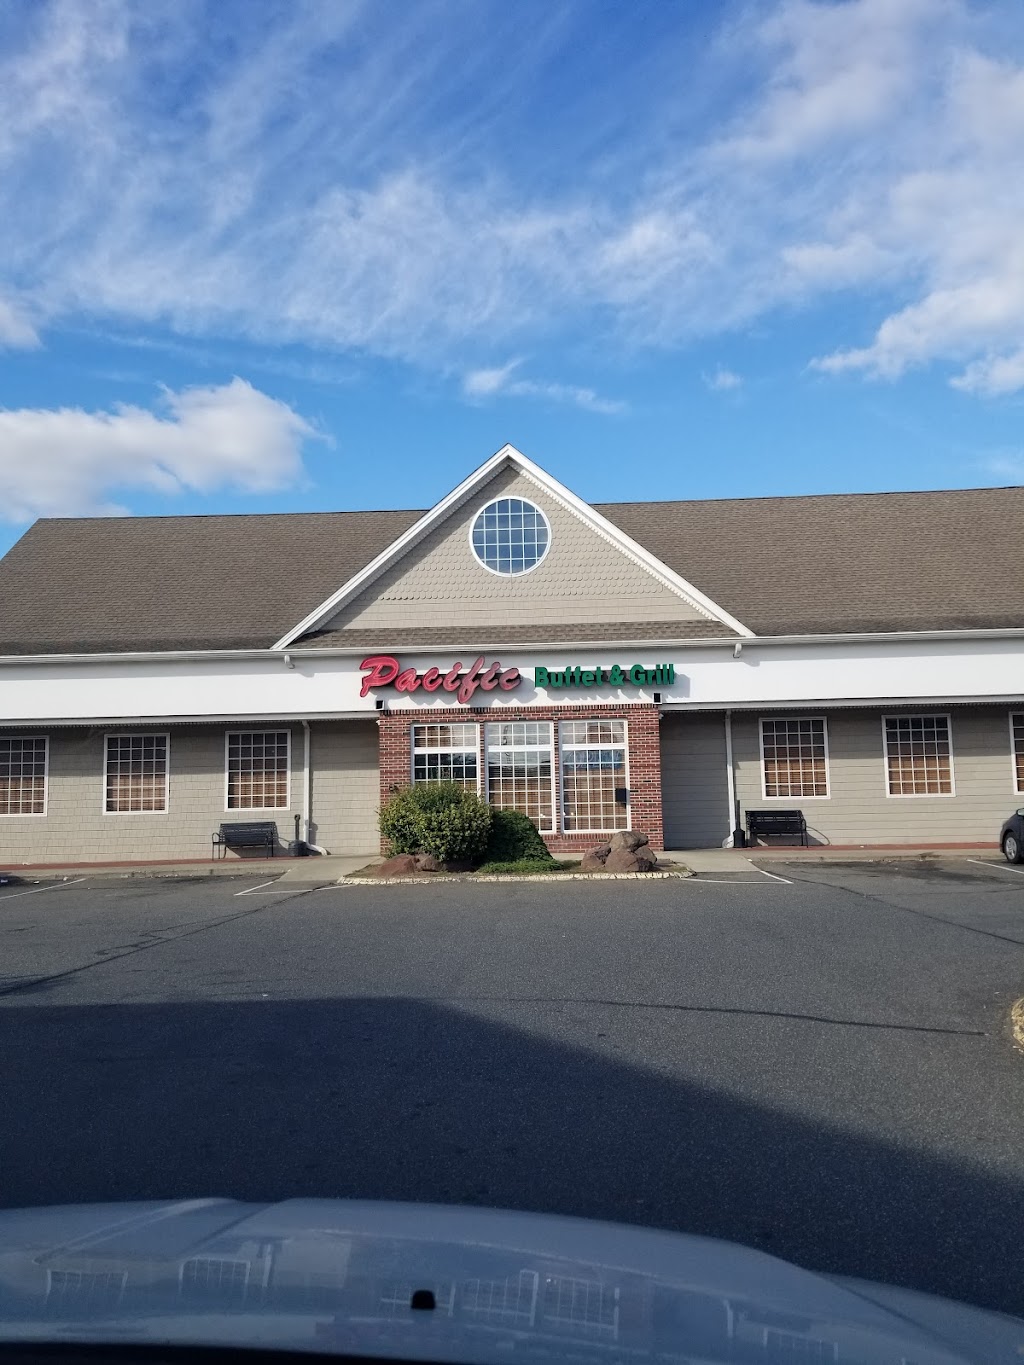 Pacific Buffet & Grill | 20 Ives Rd # 301C, Wallingford, CT 06492 | Phone: (203) 269-6888